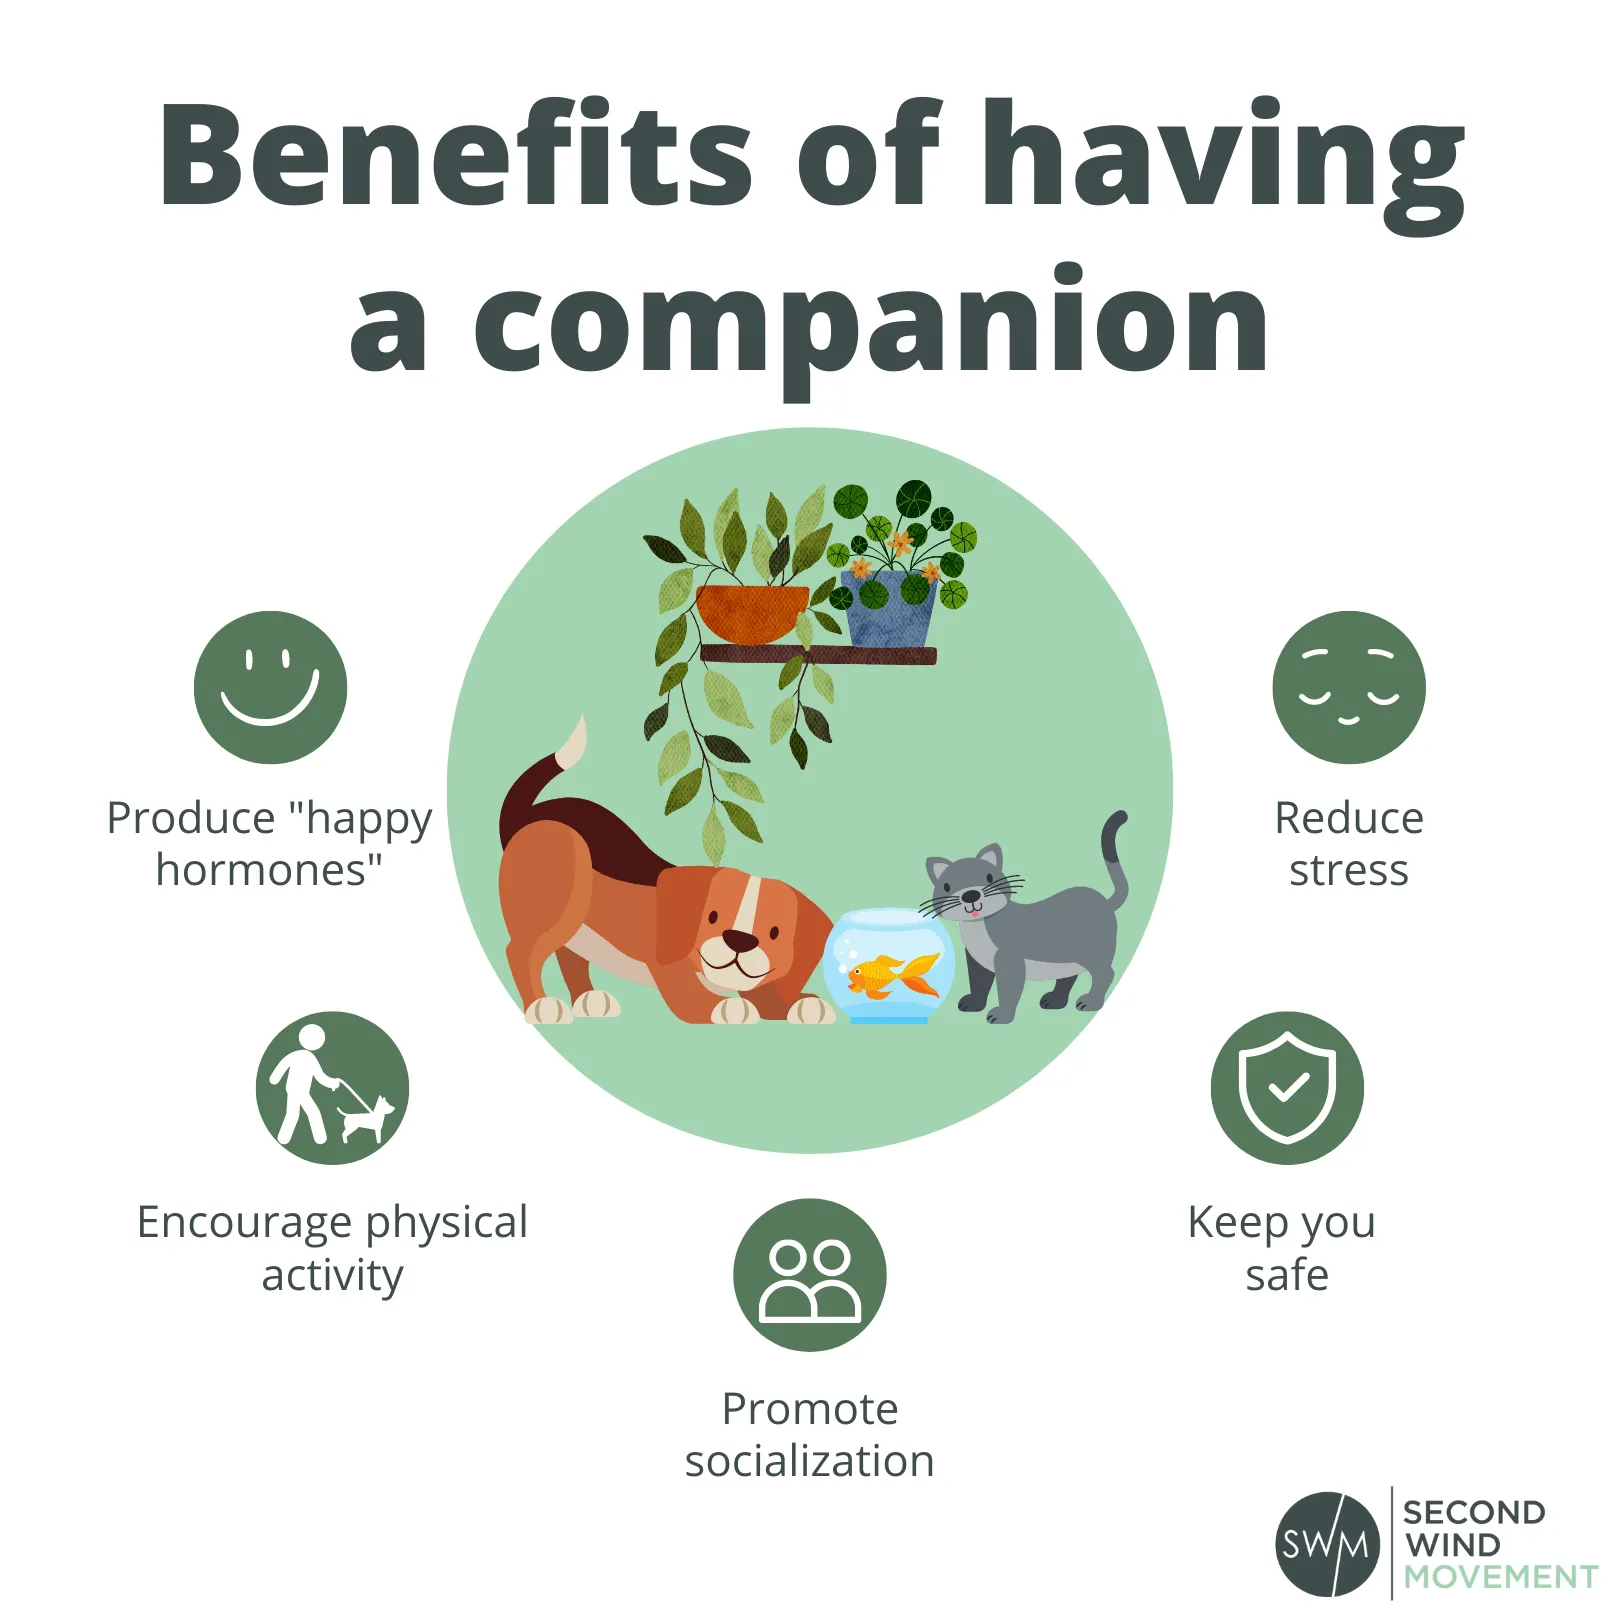 benefits of having a plant companion or pet - produce happy hormones, encourage physical activity, promote socialization, keep you safe, reduce stress